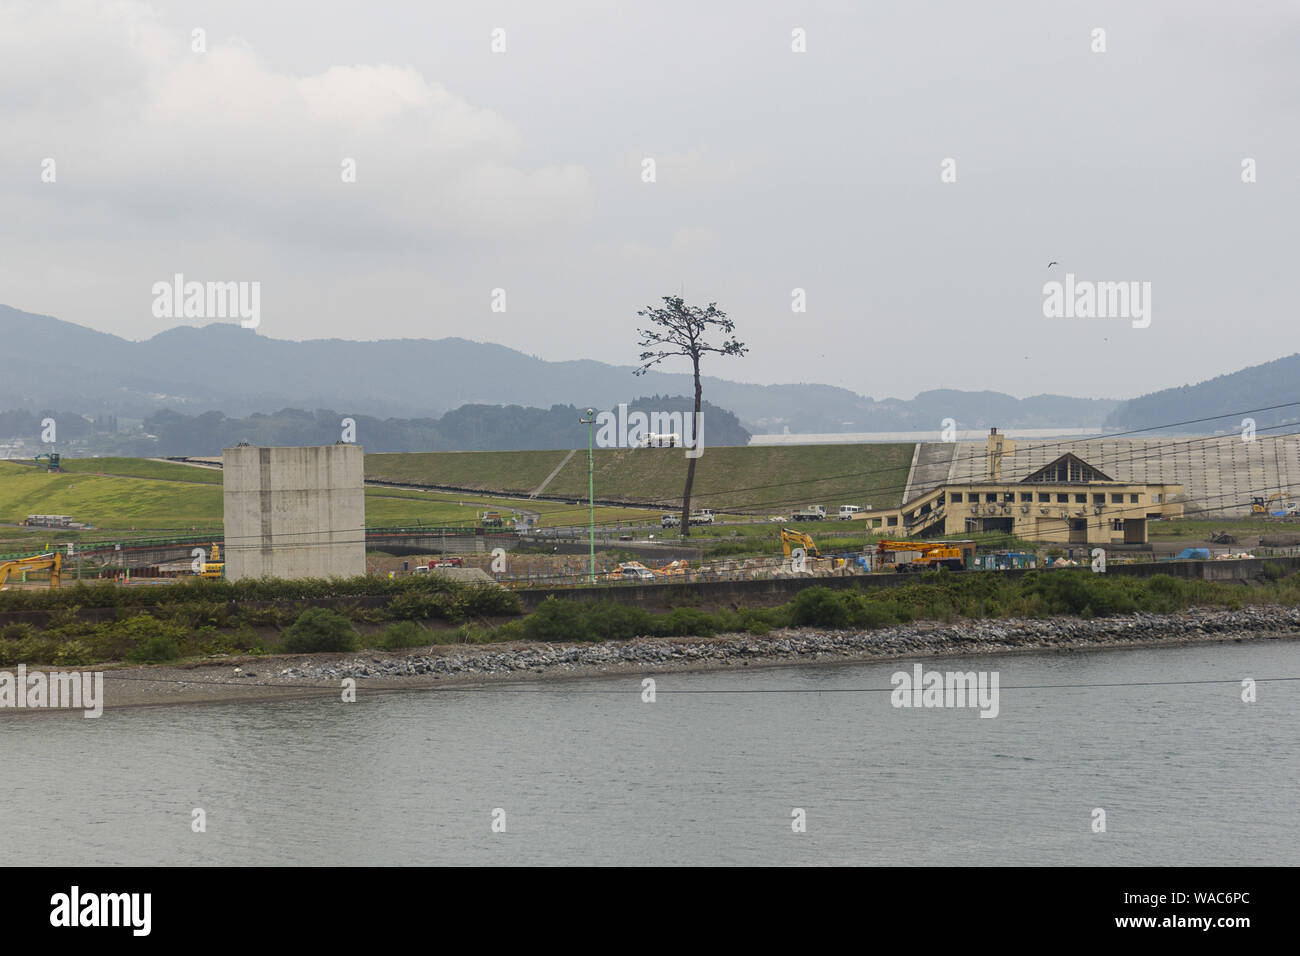 Rikuzentakata, Japan. 19th Aug, 2019. The miracle pine tree, survivor of the 2011 Tsunami is seen at Takata-Matsubara Memorial Park for Tsunami Disaster which is under construction. The memorial park is constructed by the Government of Japan and the government of Iwate Prefecture to remember the victims of the 2011 Earthquake, and as a symbol of strong will for reconstruction. The park will open its new Great East Japan Tsunami Museum on September 22, 2019, and its full services at the beginning of 2021. The ''Tohoku Media Tour: Iwate Course'' is organized by the Tokyo Metropolitan Government Stock Photo